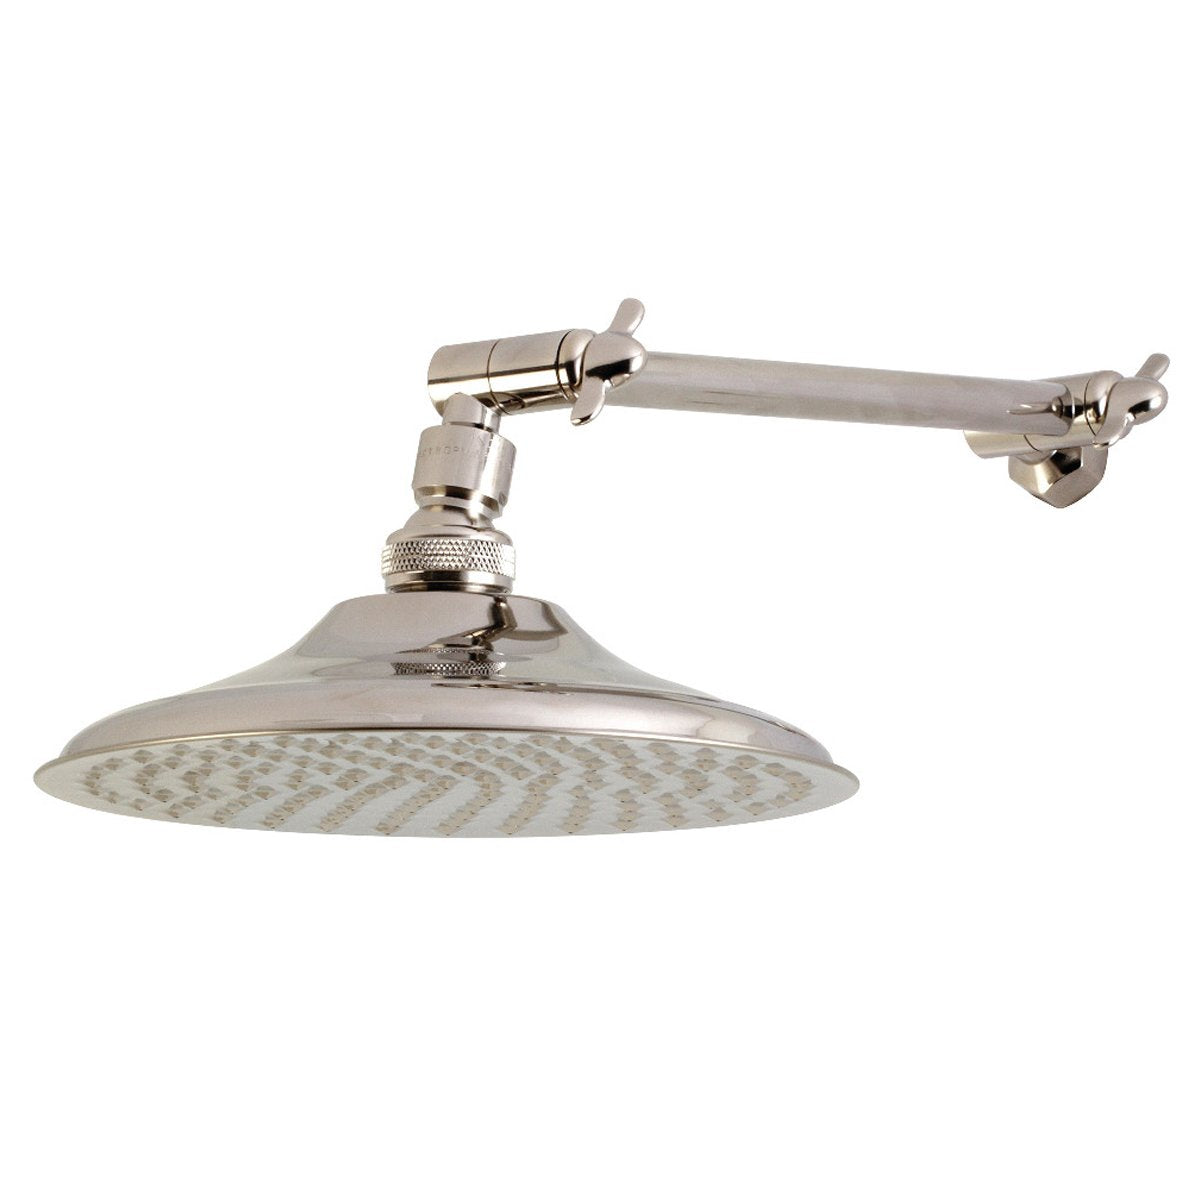 Kingston Brass Victorian Shower Head with Adjustable Shower Arm in Polished Nickel